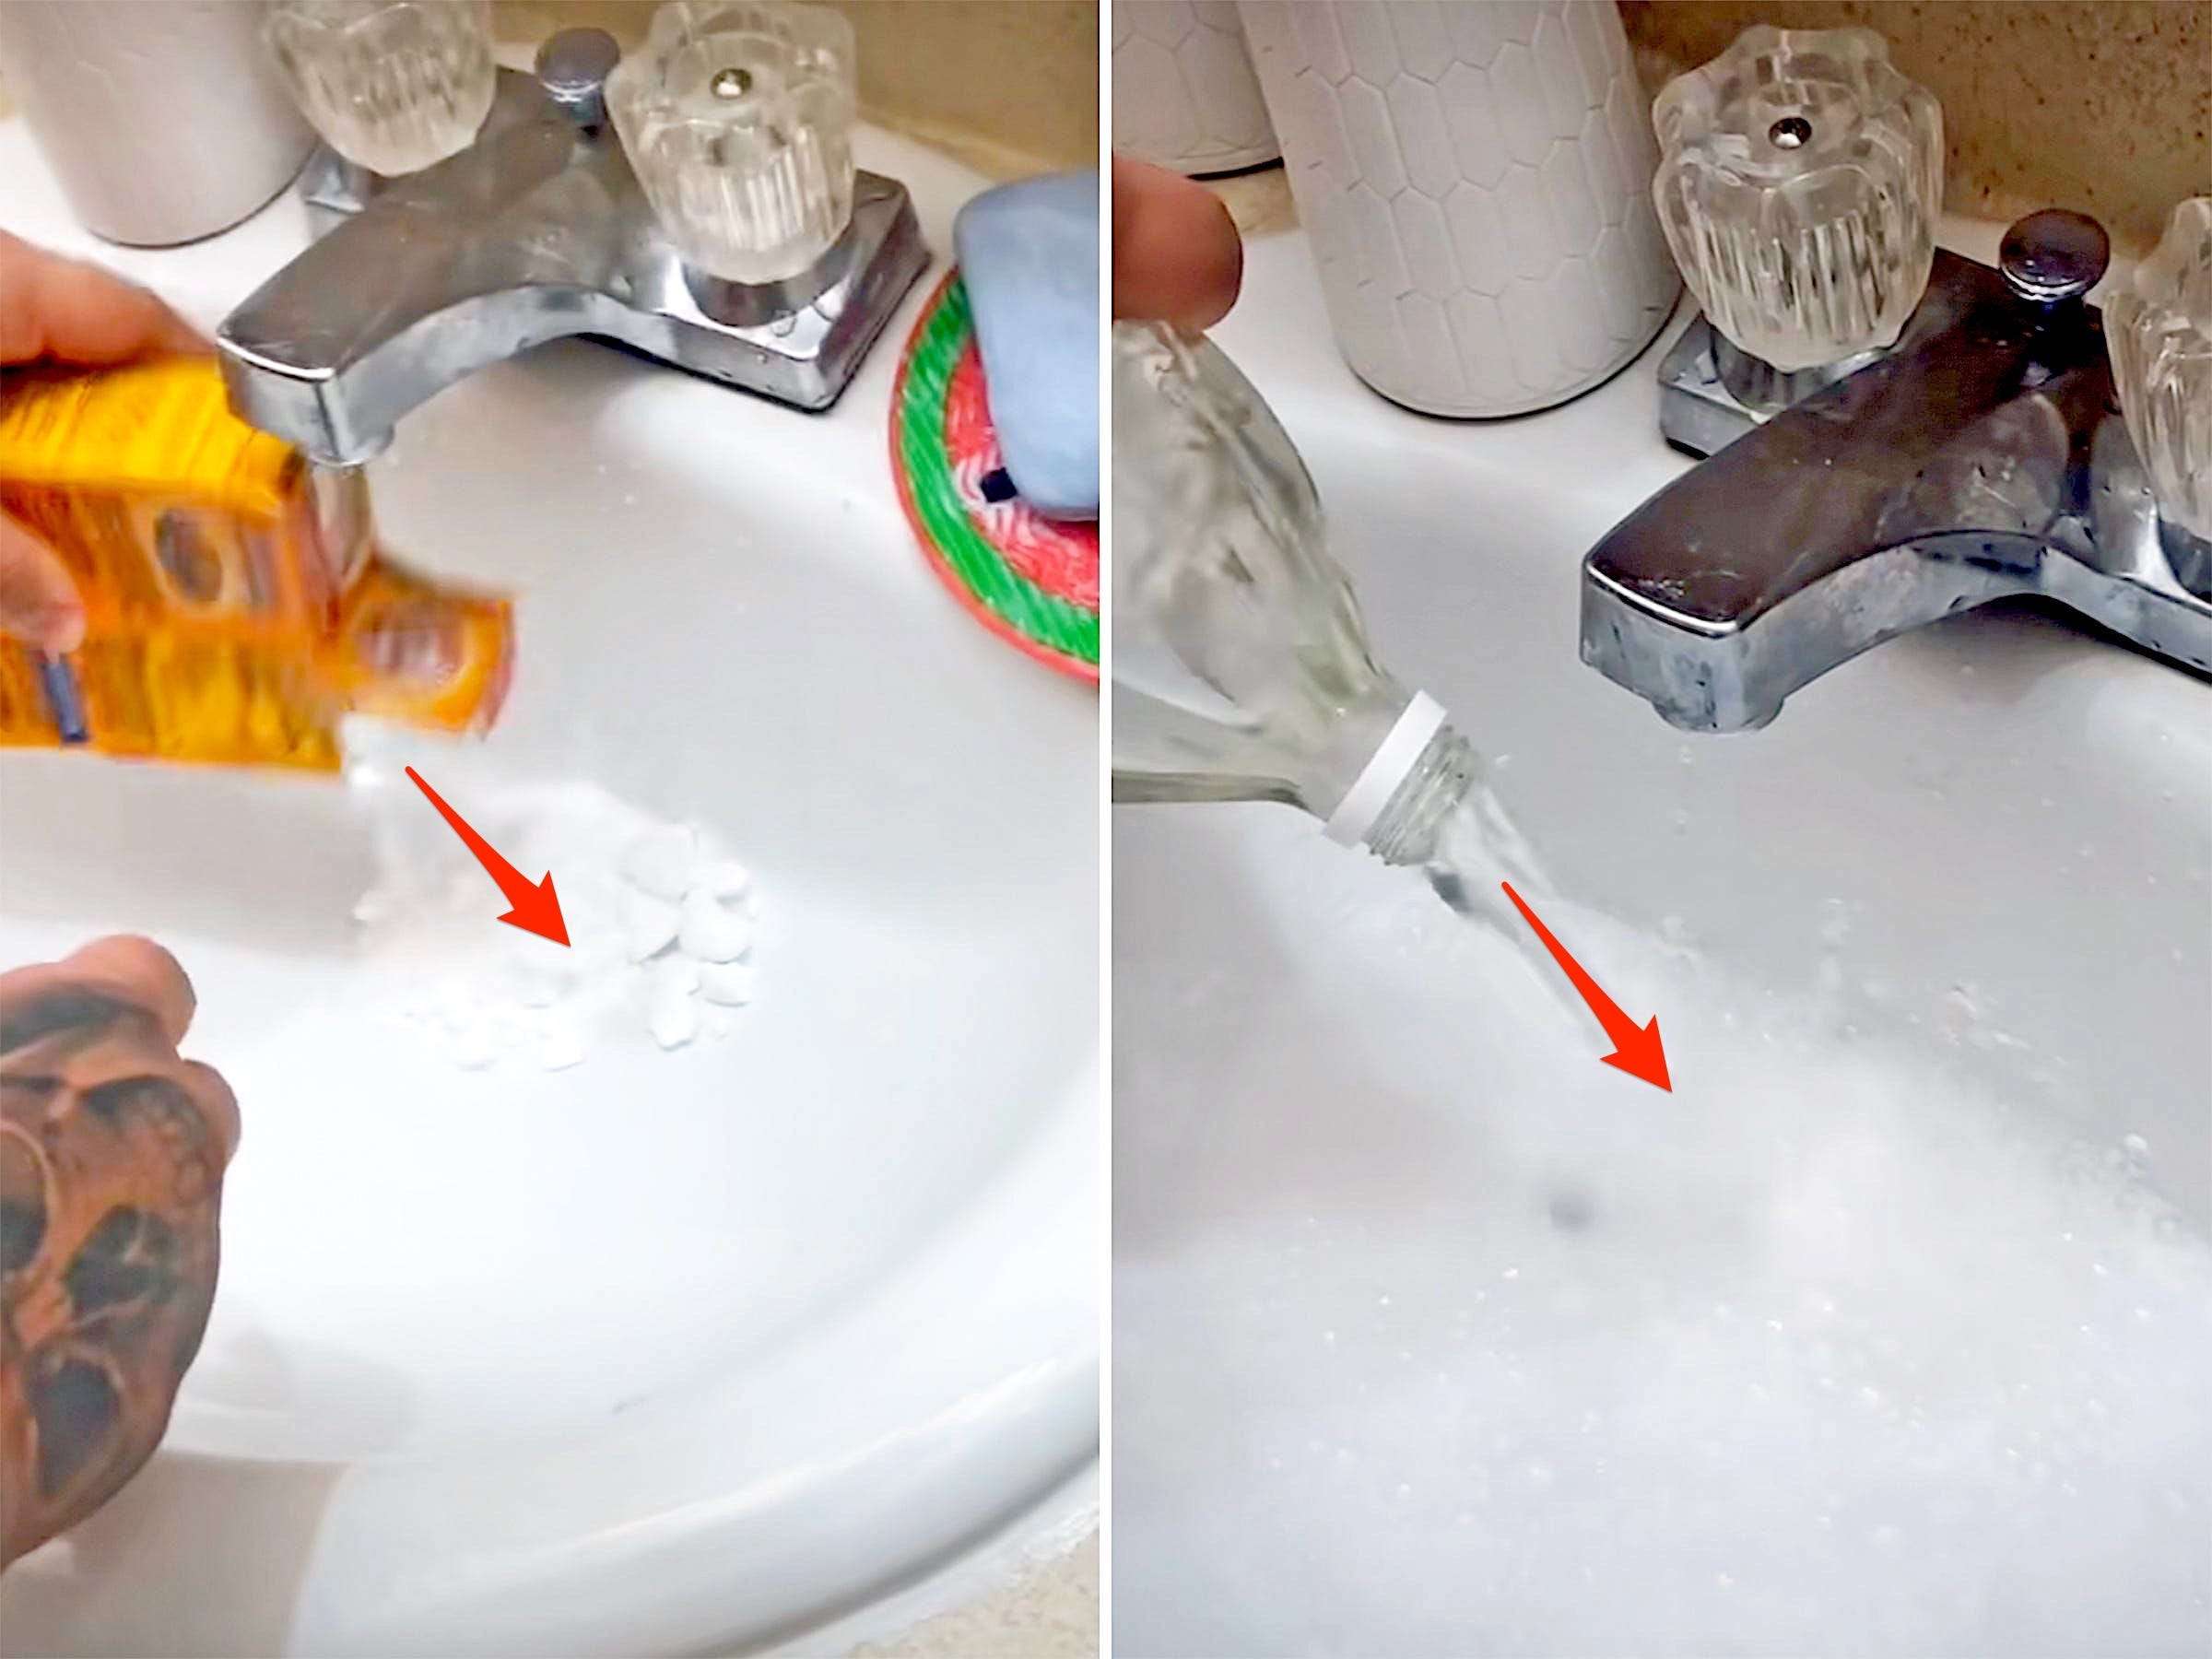 Tiktok Hack To Unclog Drains With Baking Soda And Vinegar Works